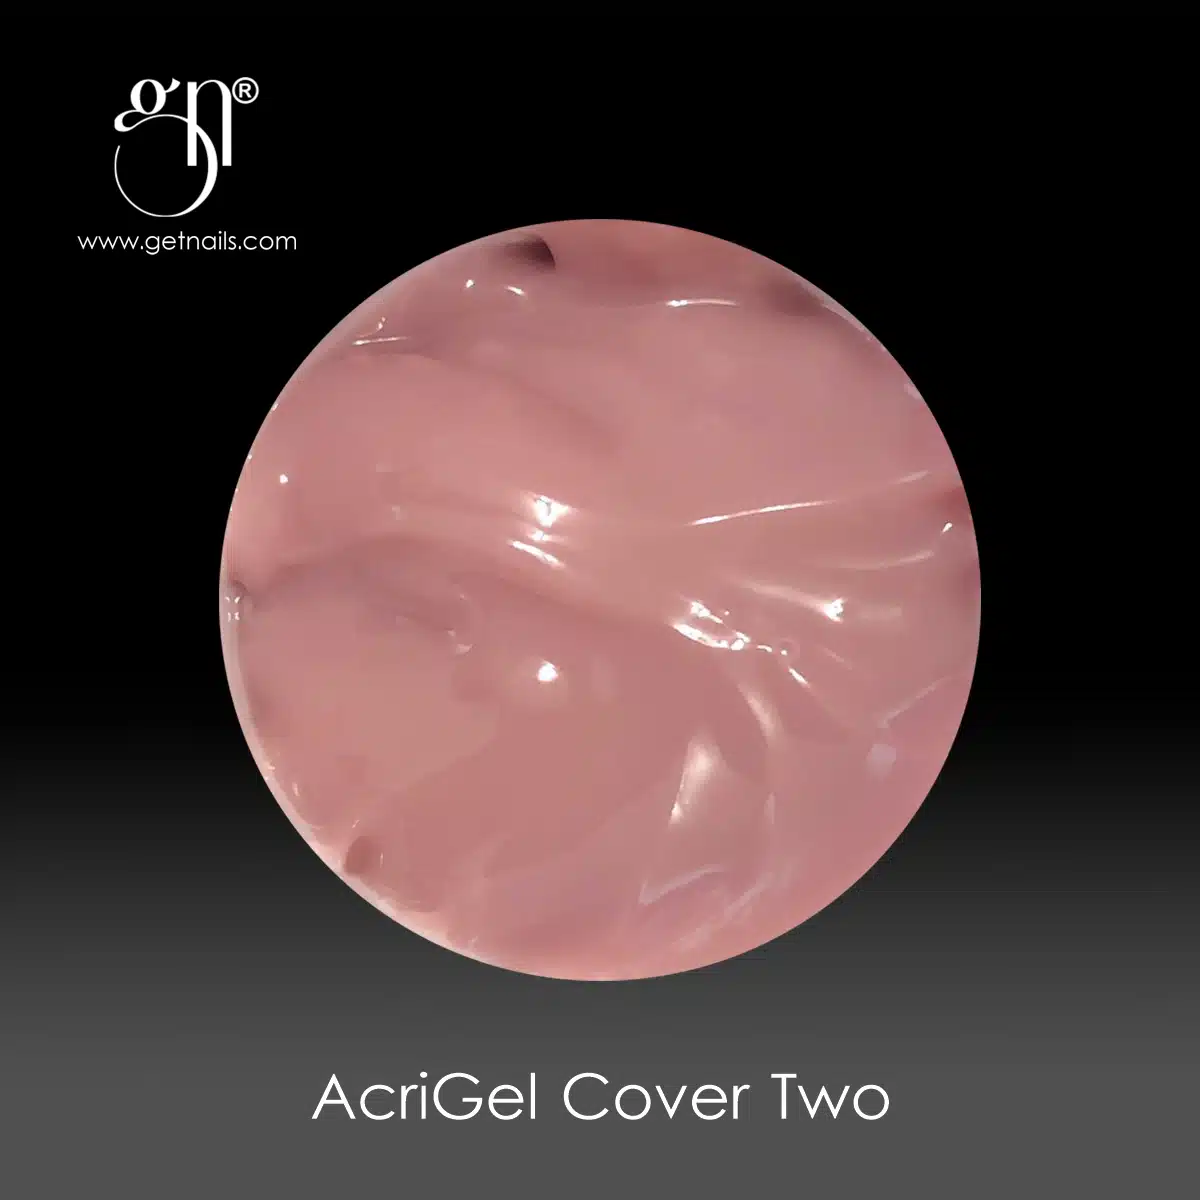 Get Nails Austria - AcriGel Cover Two Muster